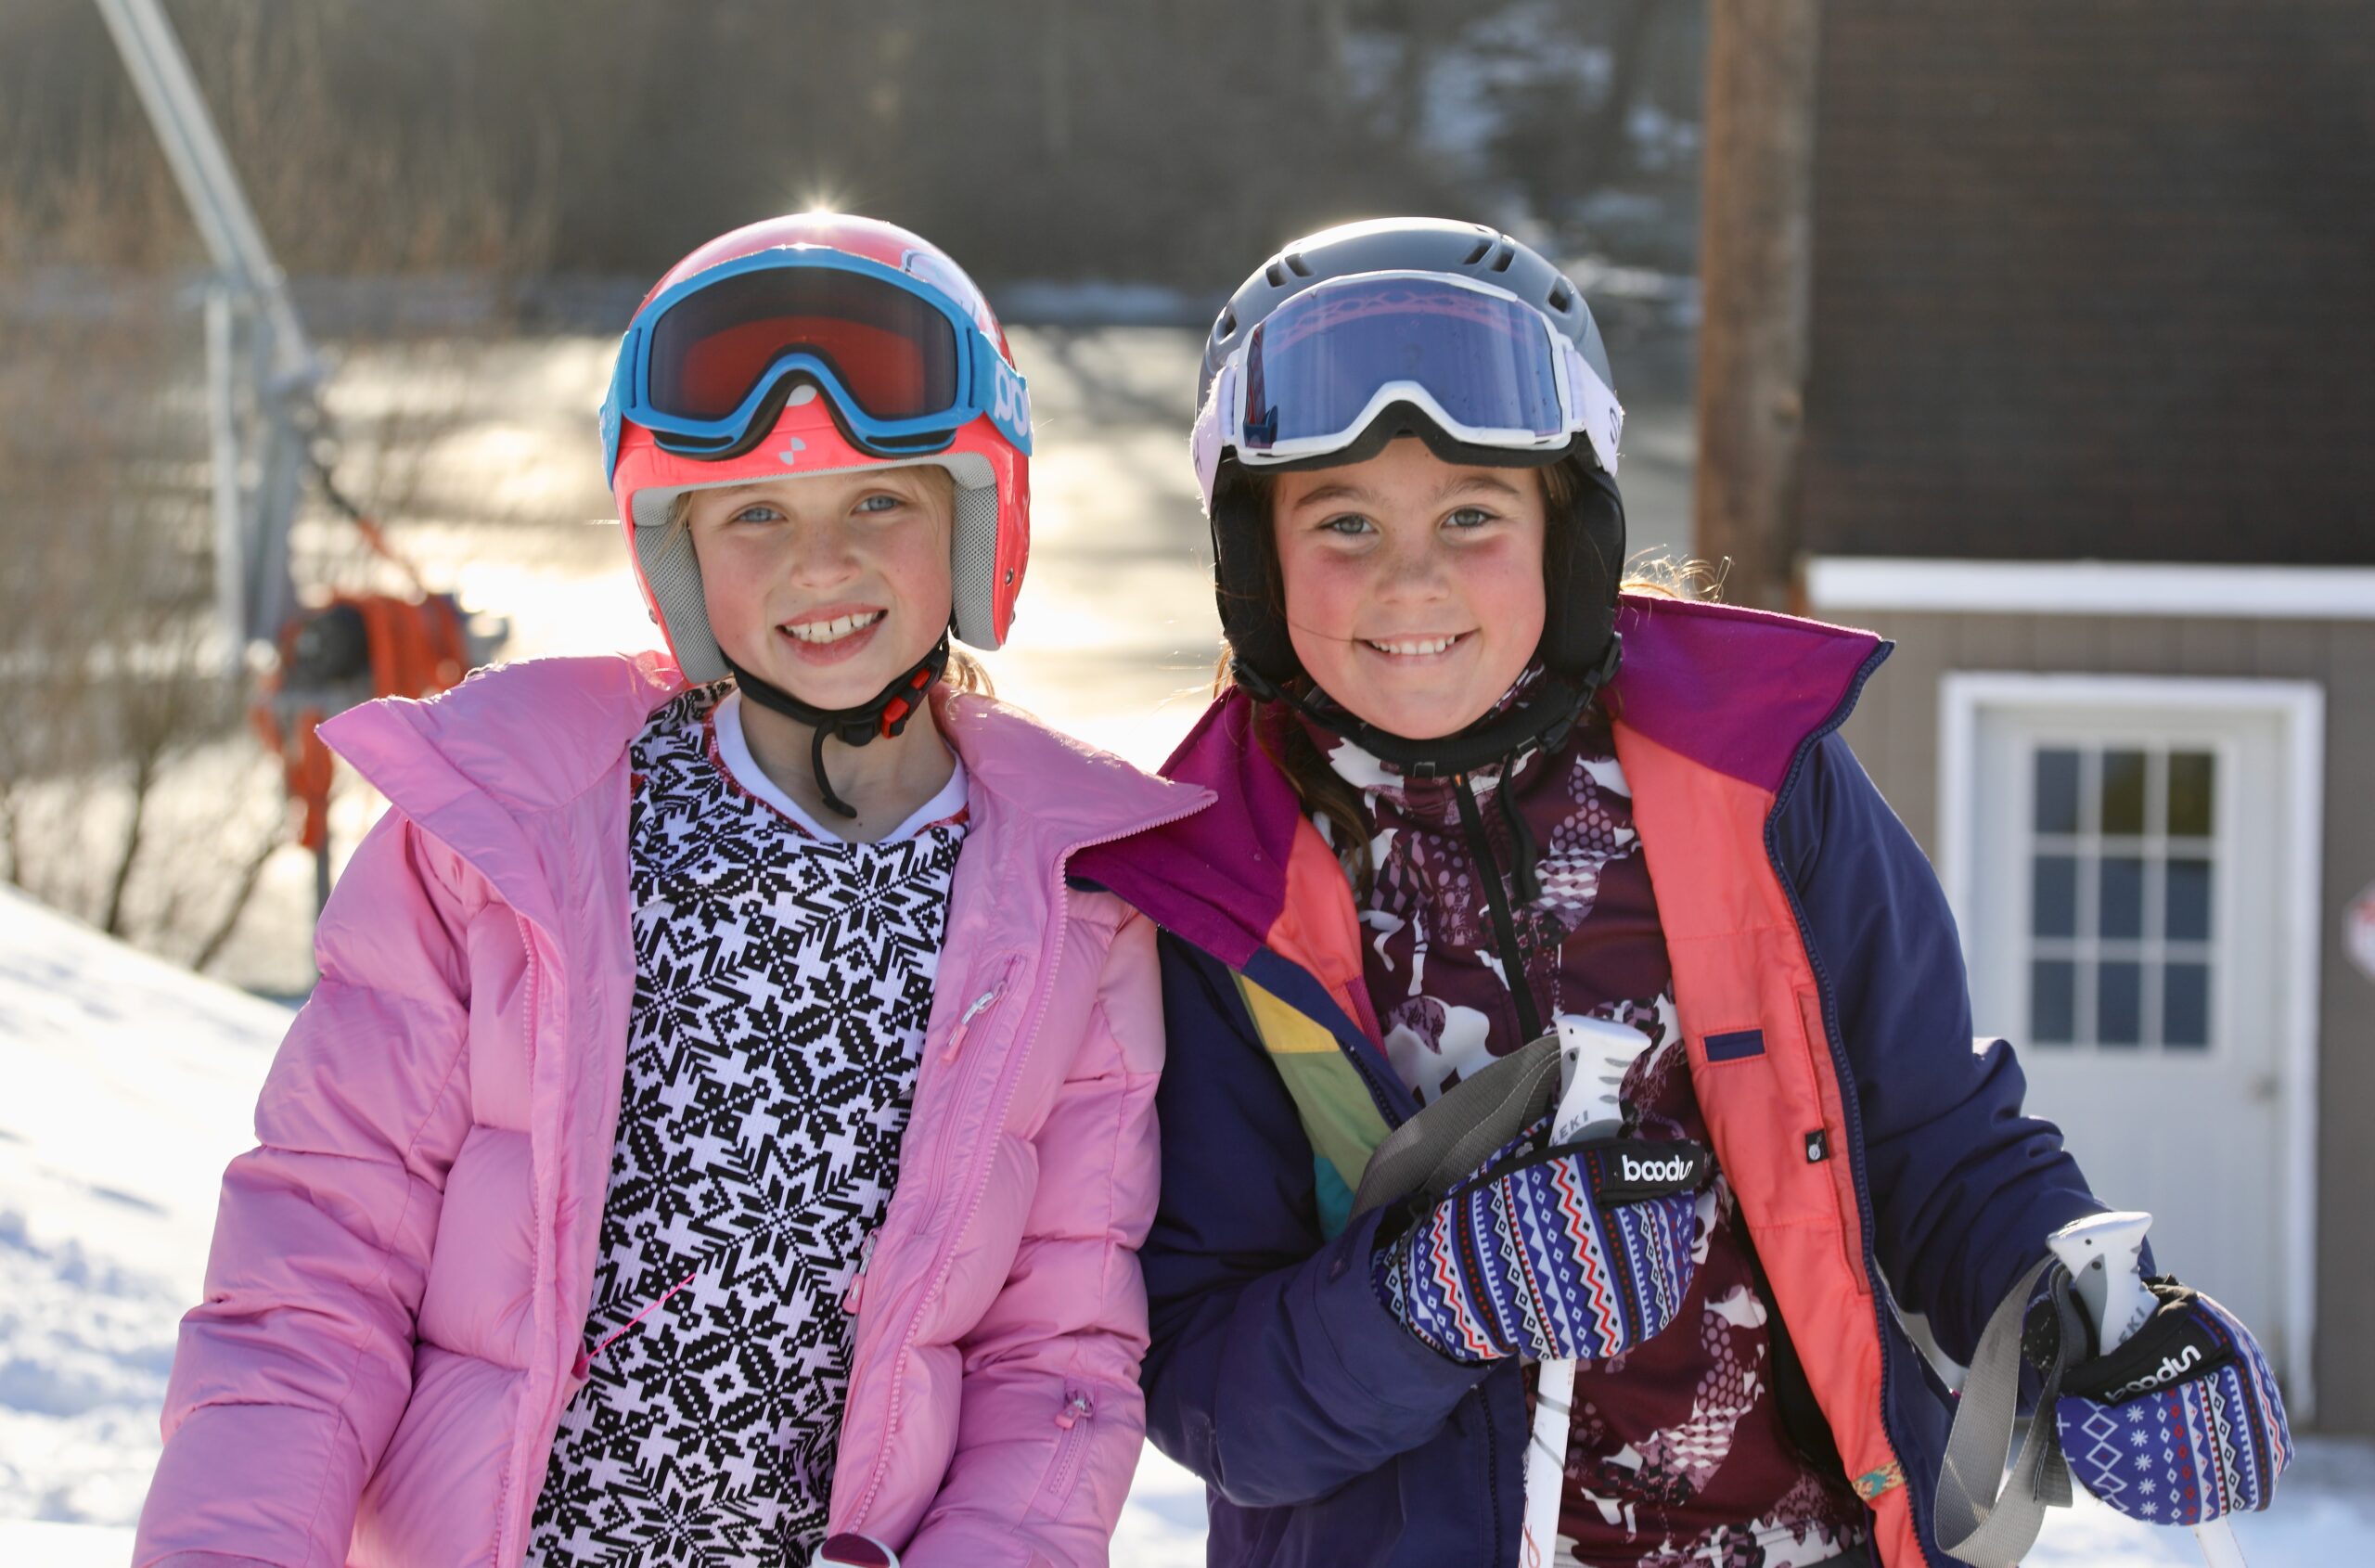 season passes for all ages at mount peter